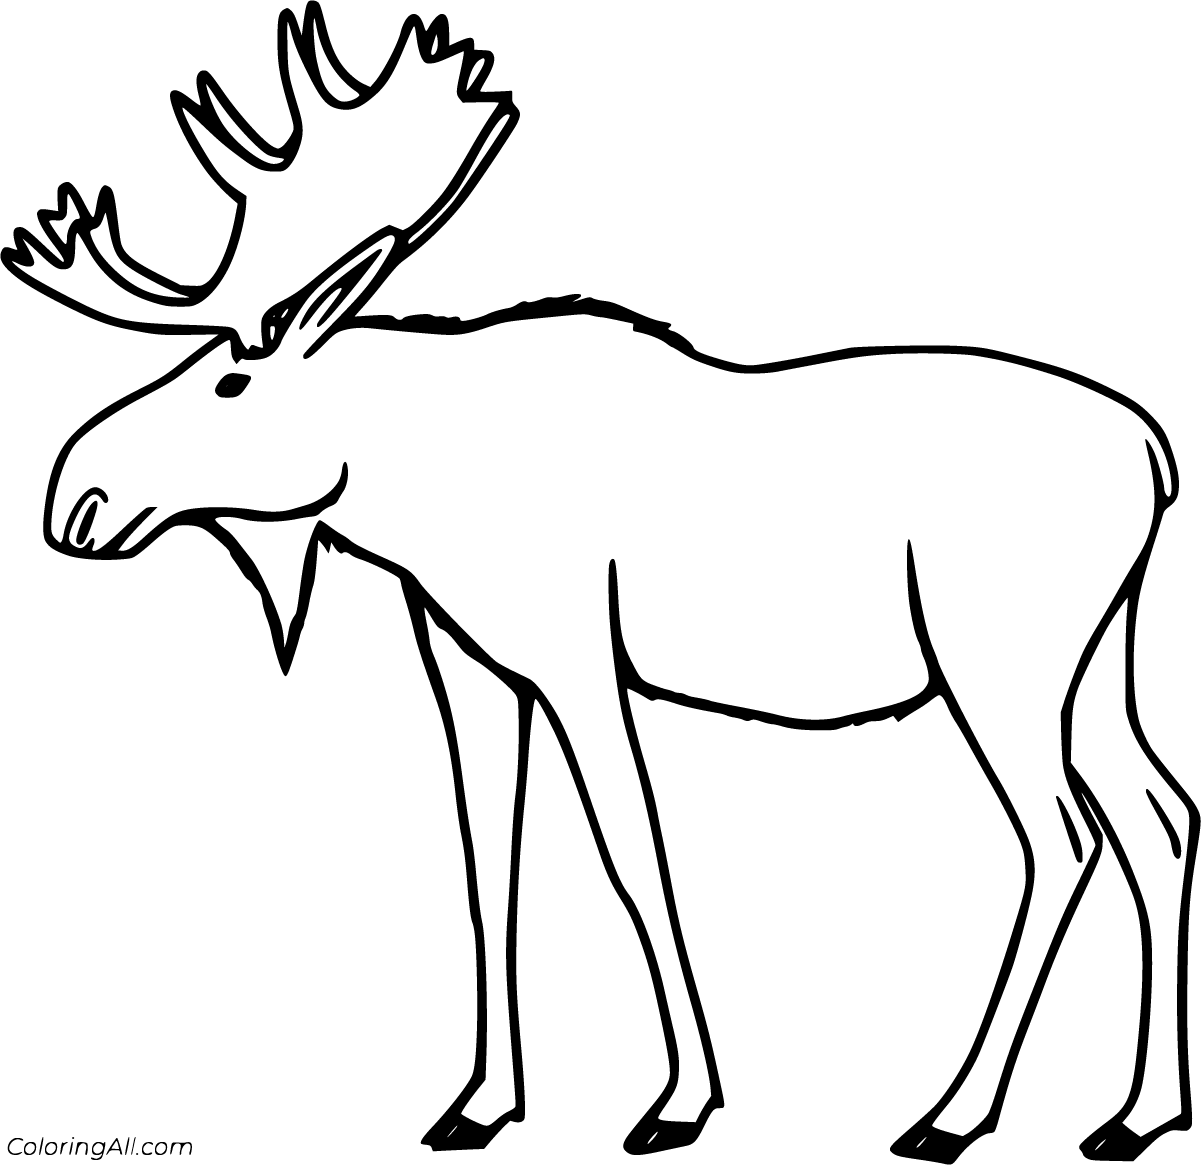 Moose Coloring Pages   ColoringAll